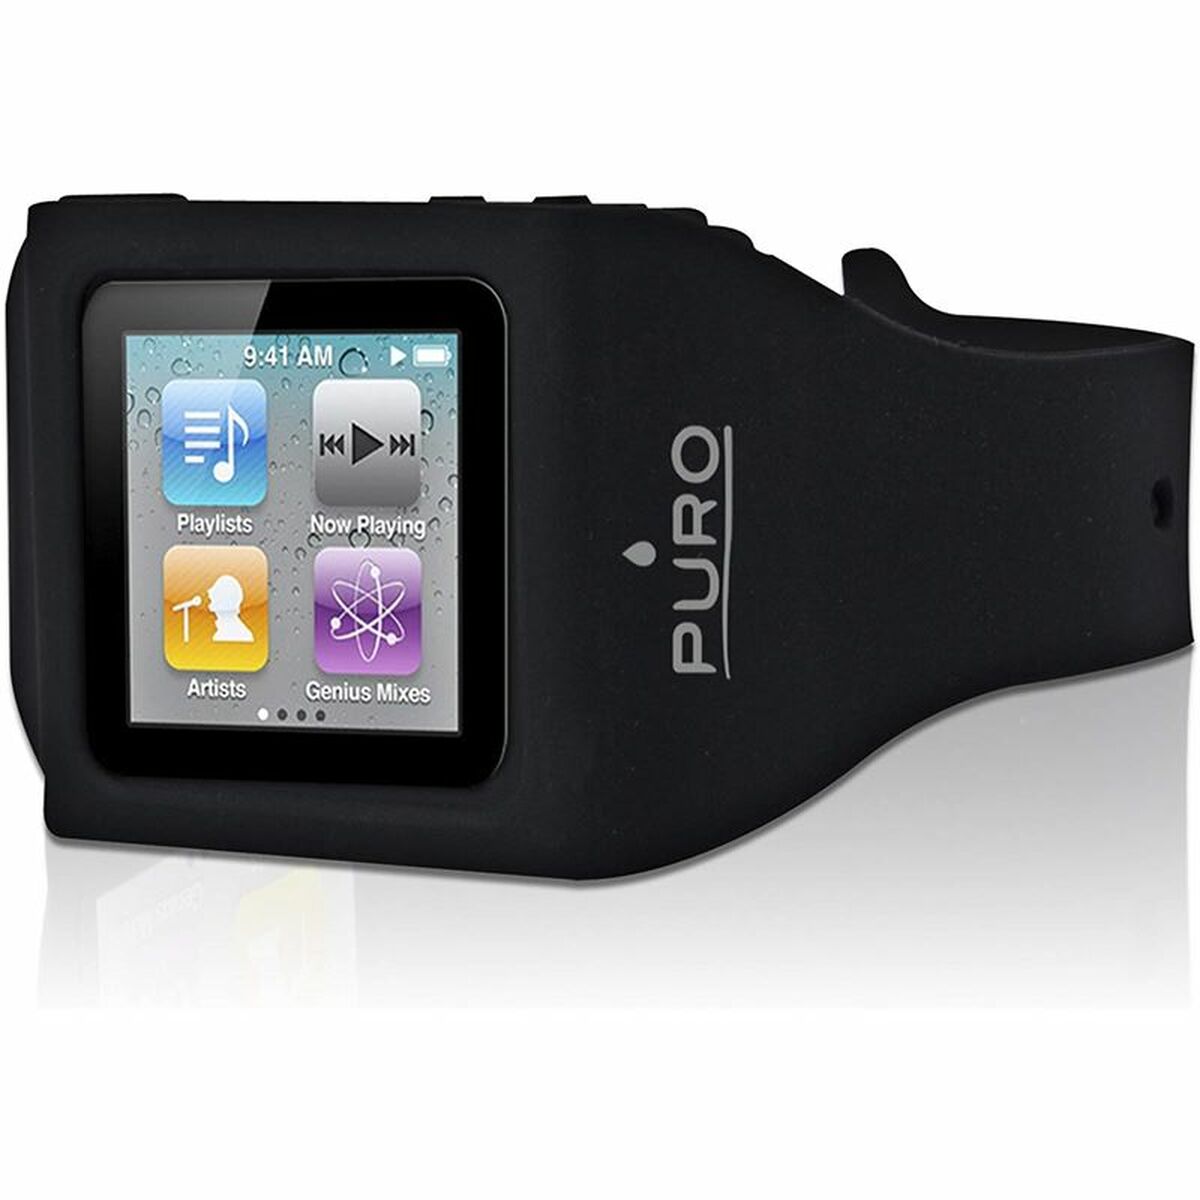 Strap Muvit Running In Off Com  Ipod 6 Black, Muvit, Sports and outdoors, Electronics and devices, strap-muvit-running-in-off-com-ipod-6-black, :Black, Brand_Muvit, category-reference-2609, category-reference-2617, category-reference-2634, category-reference-t-19756, category-reference-t-7034, category-reference-t-7035, category-reference-t-7038, Condition_NEW, deportista / en forma, original gifts, Price_20 - 50, telephones & tablets, vida sana, RiotNook